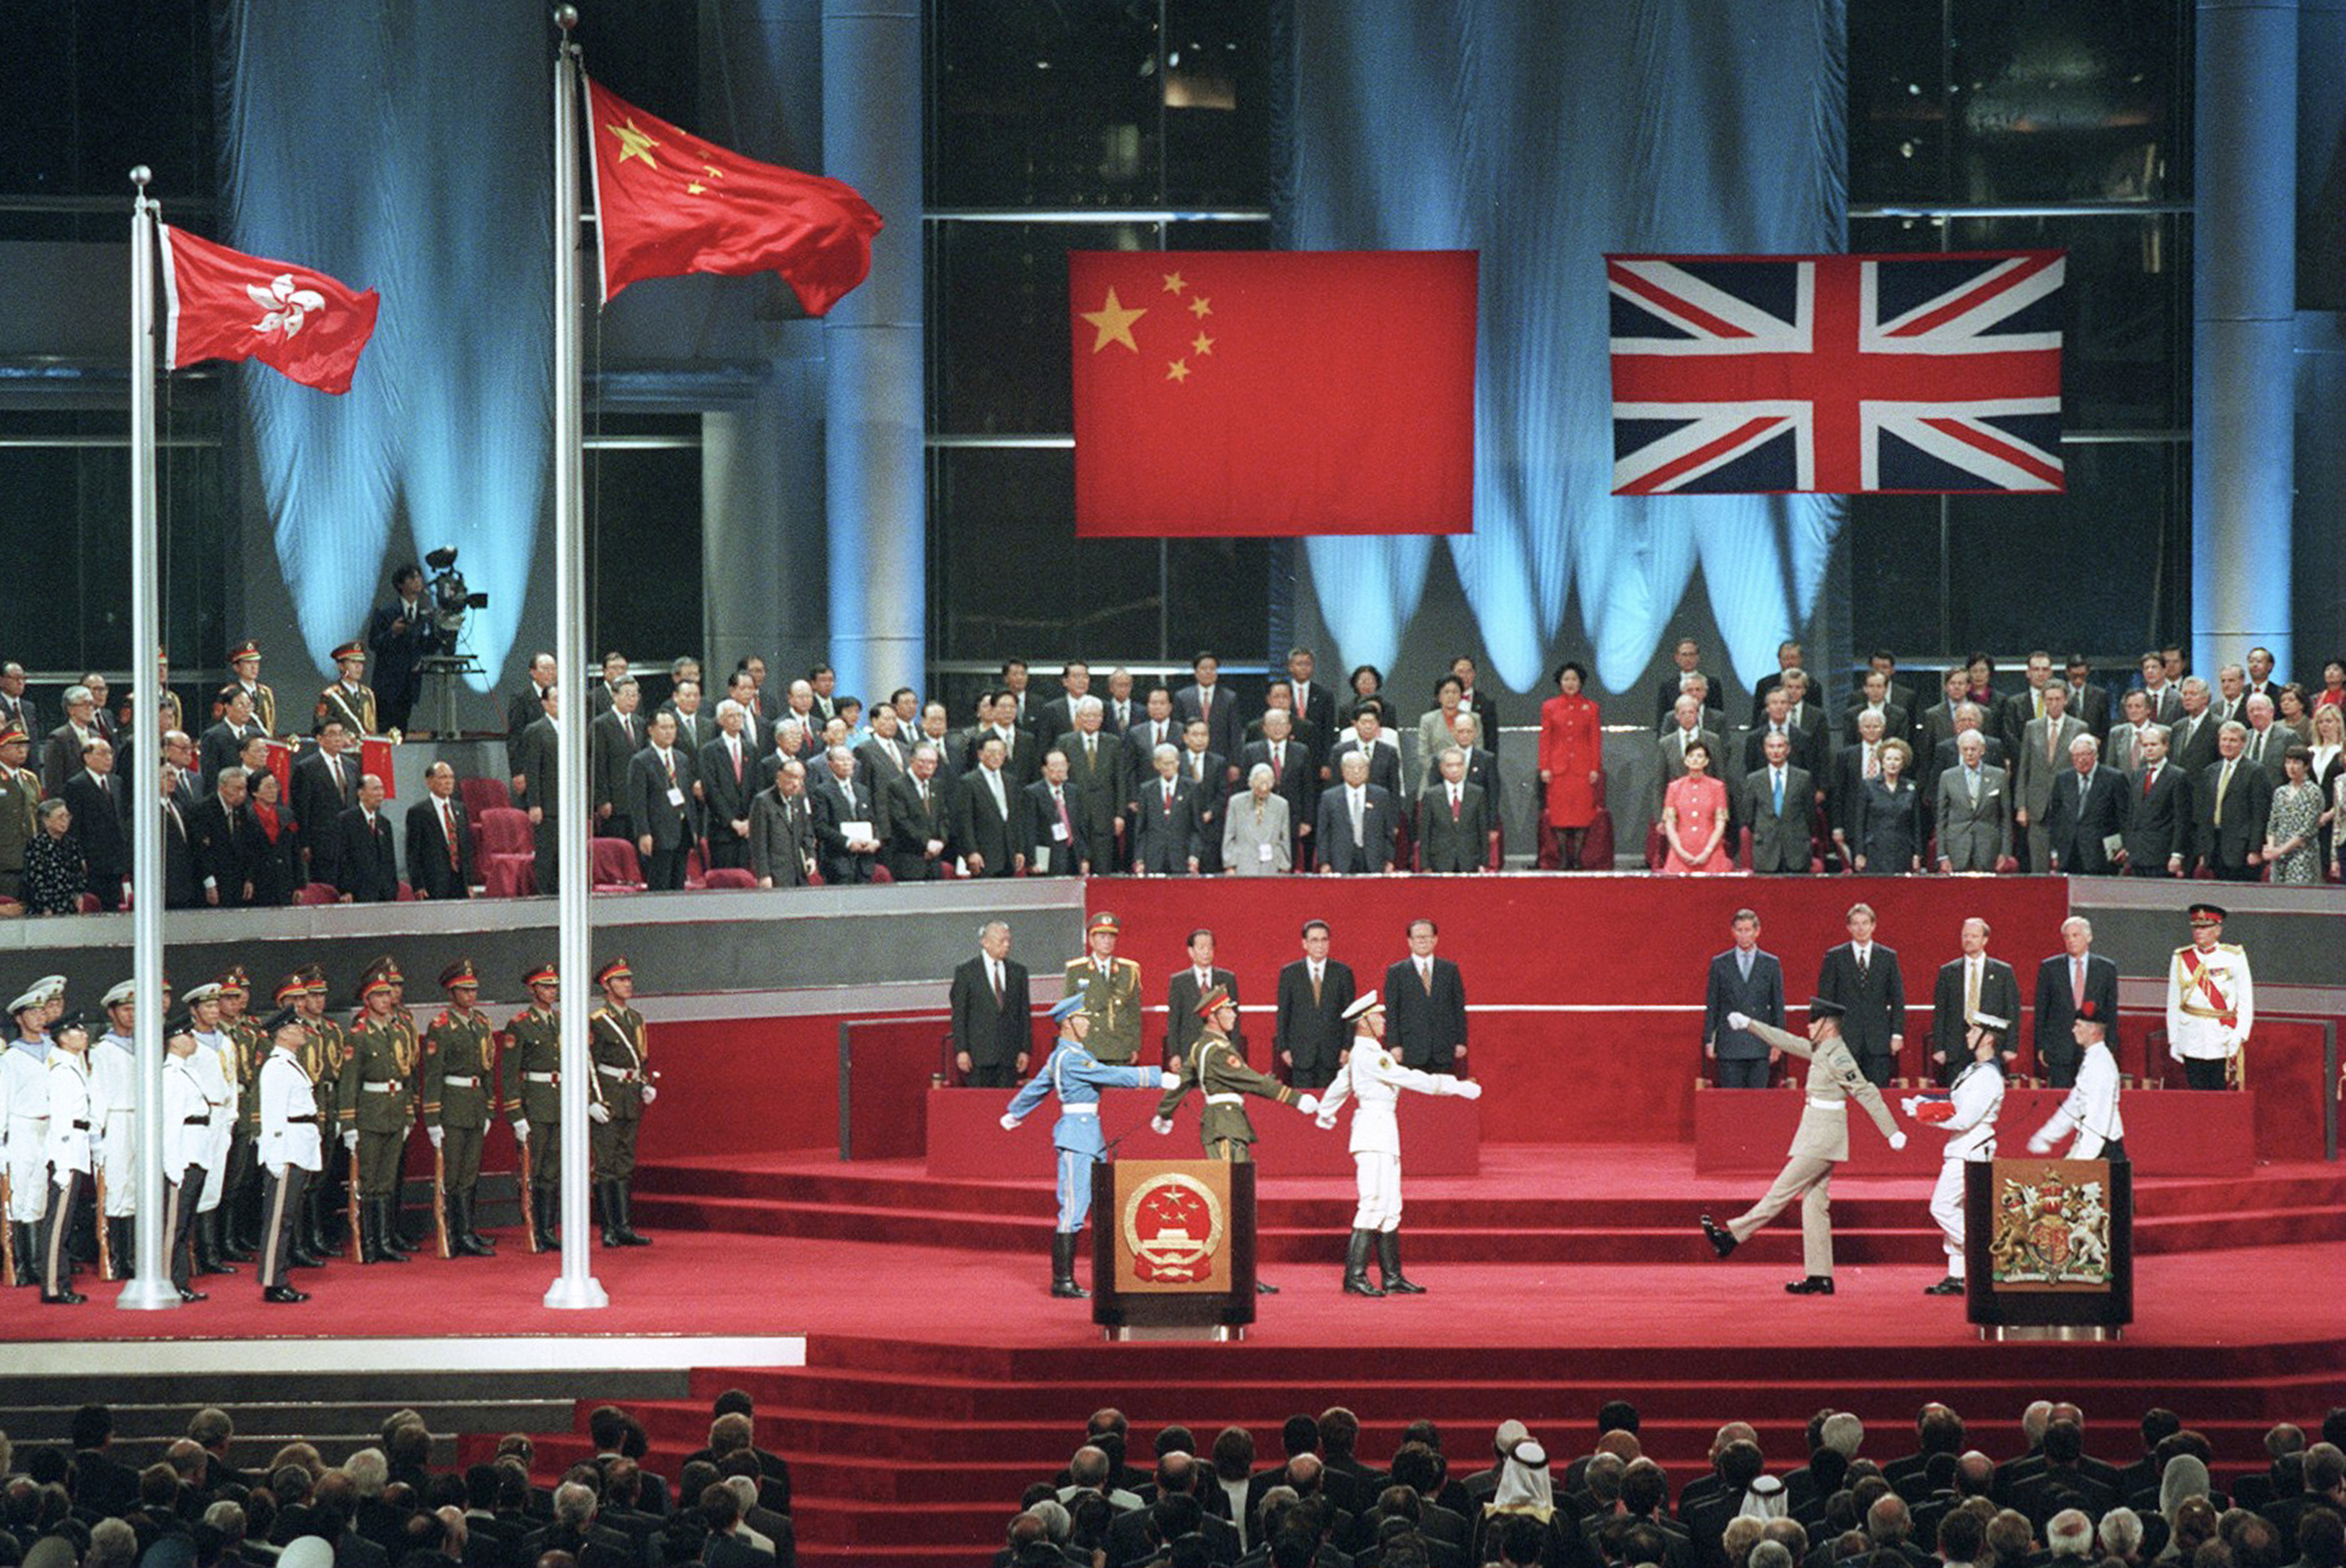 The Post’s Robert Ng says handover night in 1997 was one of the most memorable of his career. Photo: Robert Ng